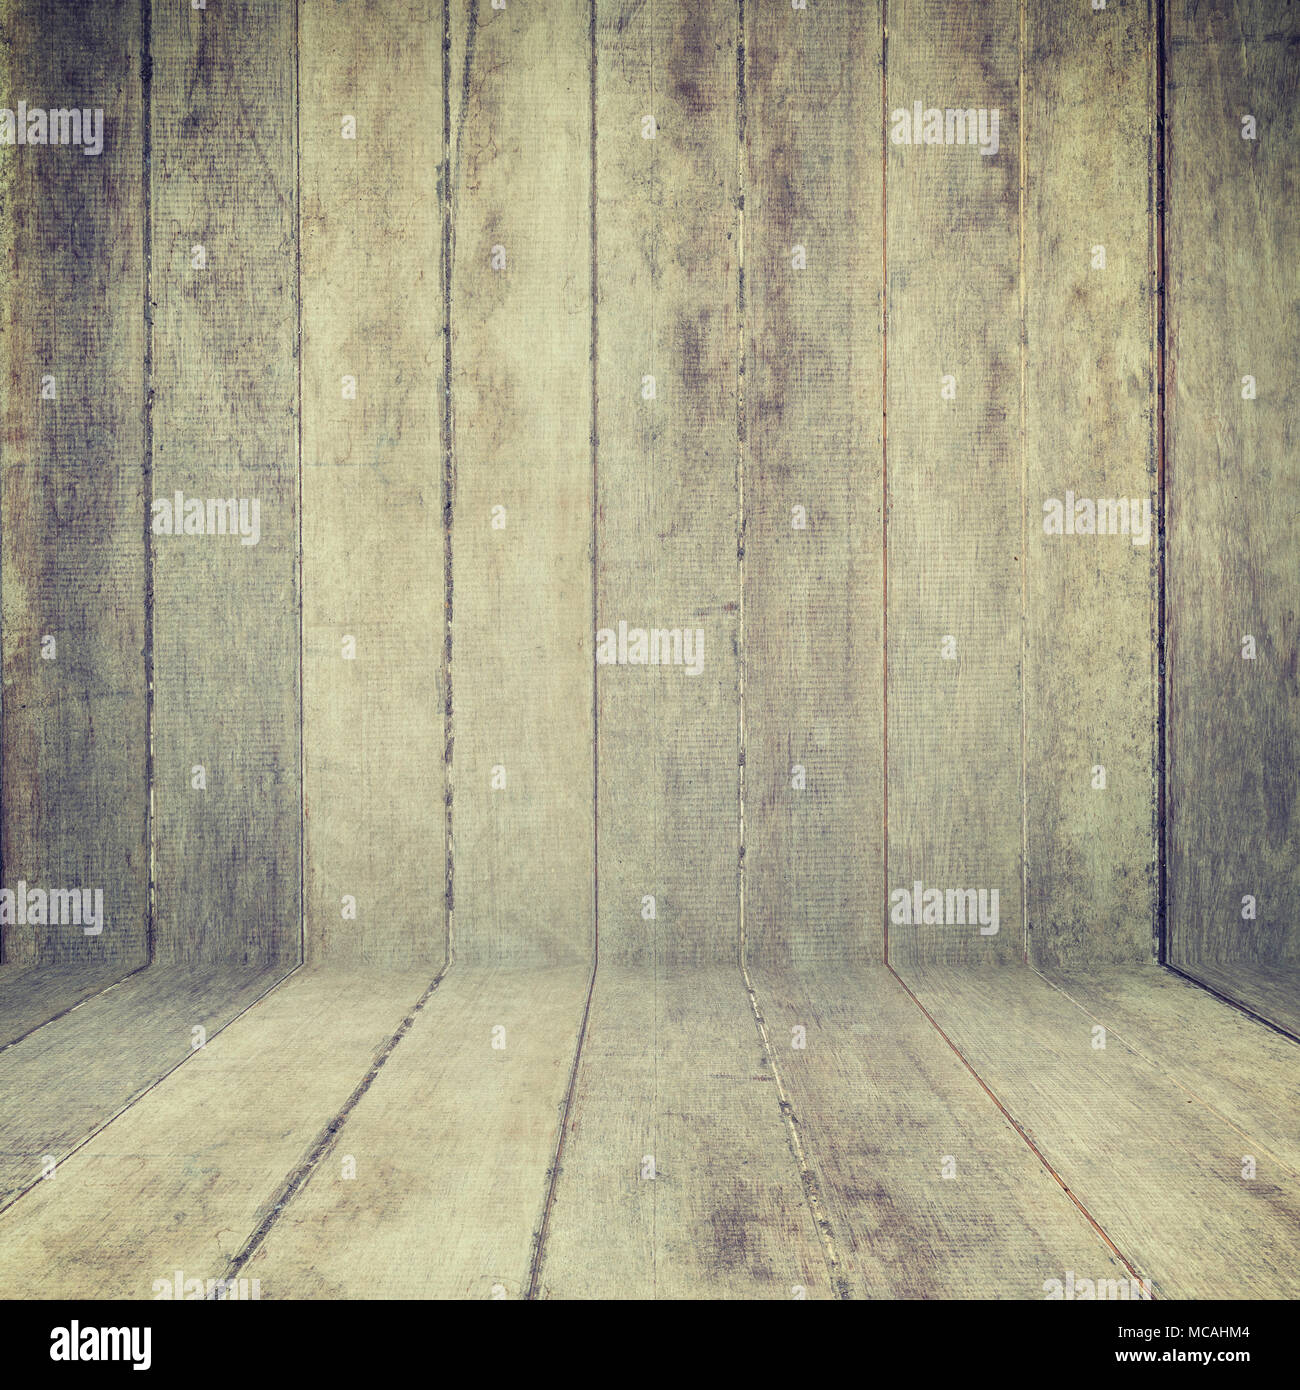 Wood texture background. old wood wall and floor perspective for background. Stock Photo